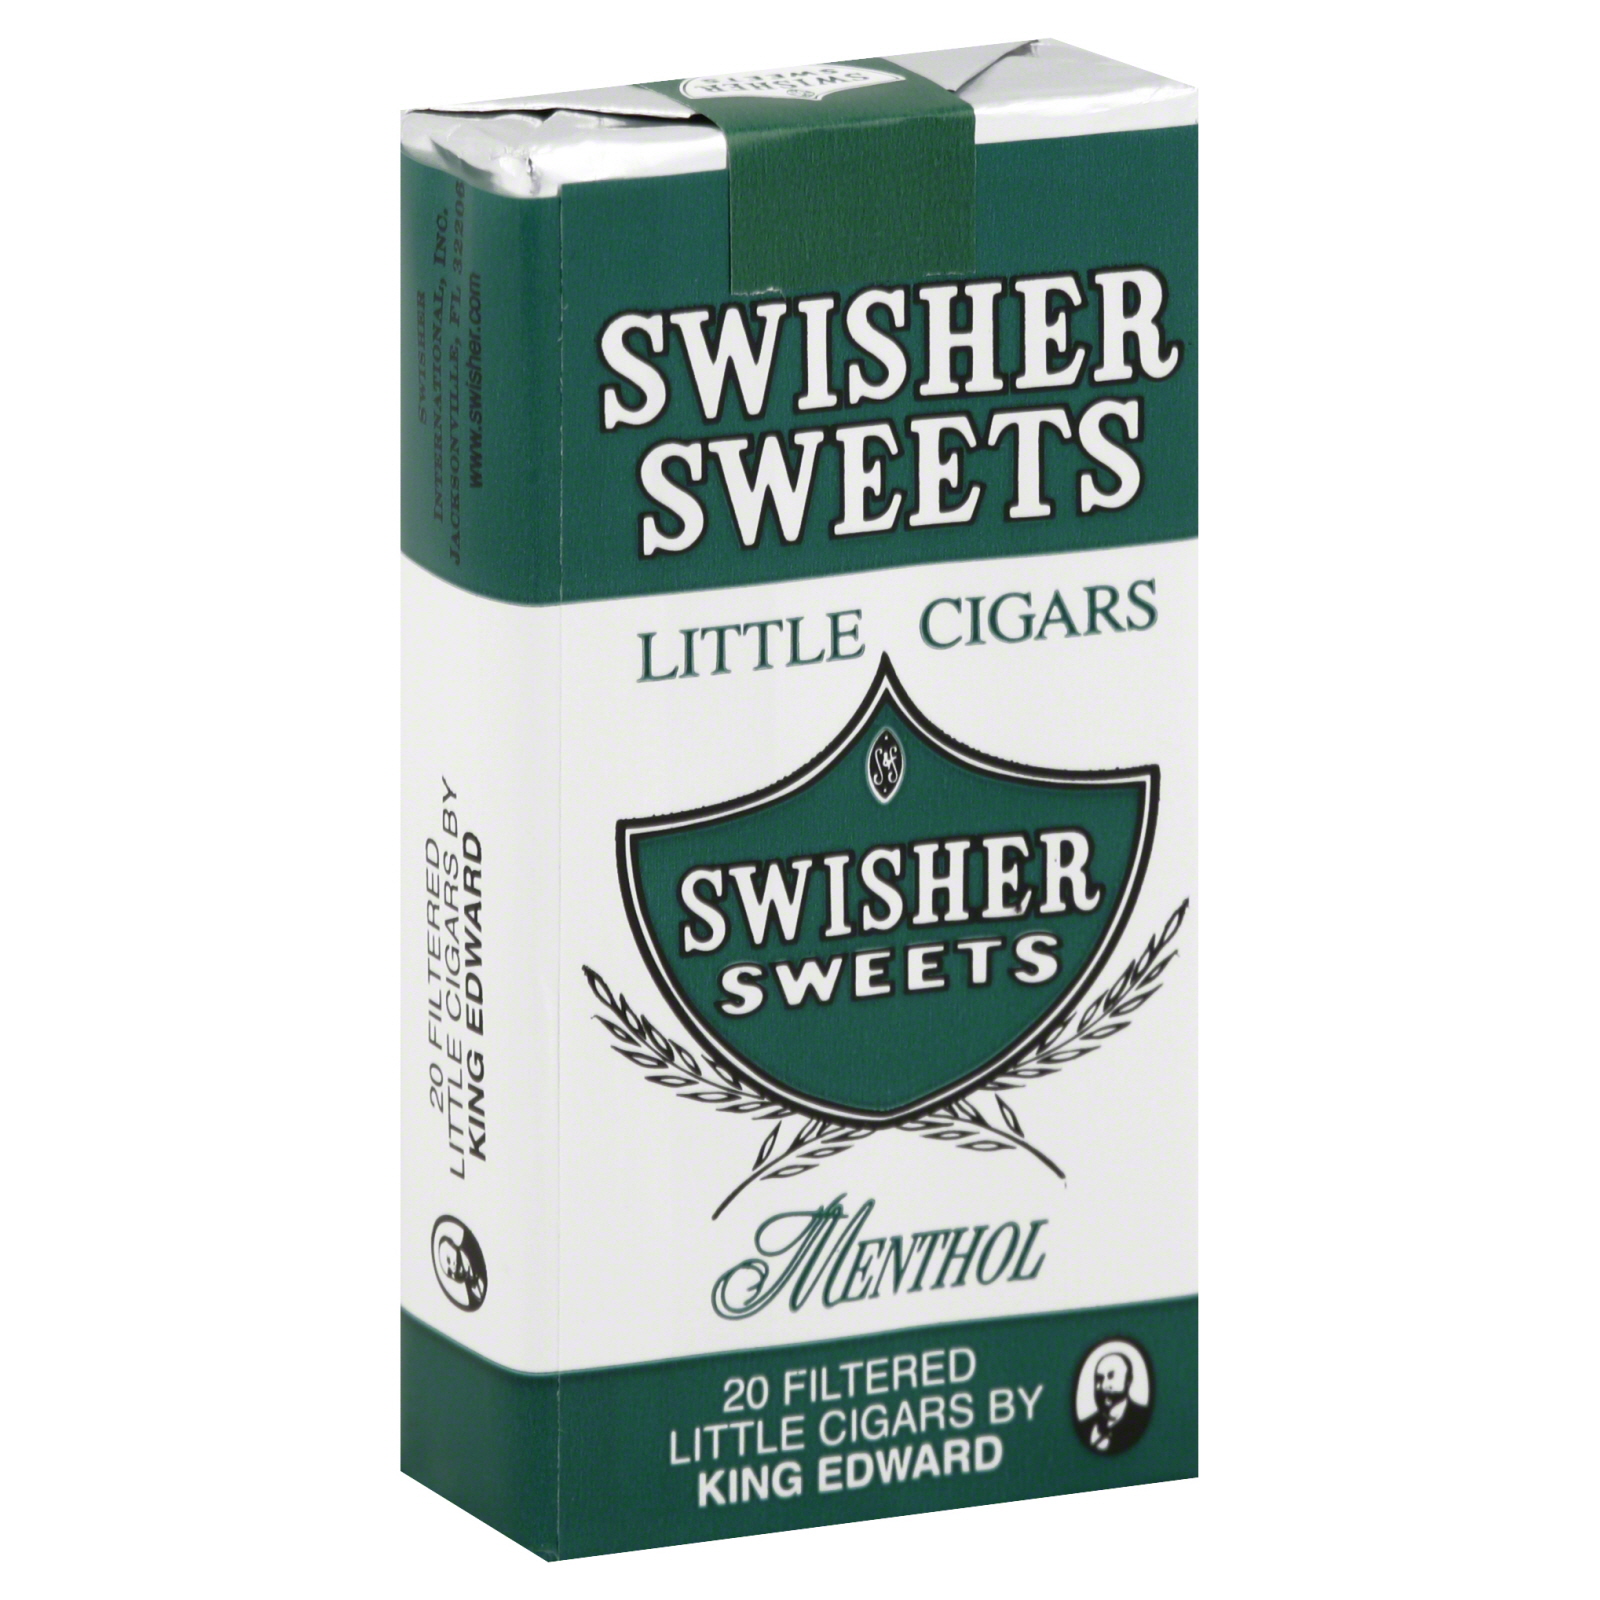 Swisher Sweets Cigars, Little, Filtered, Menthol, 20 cigars